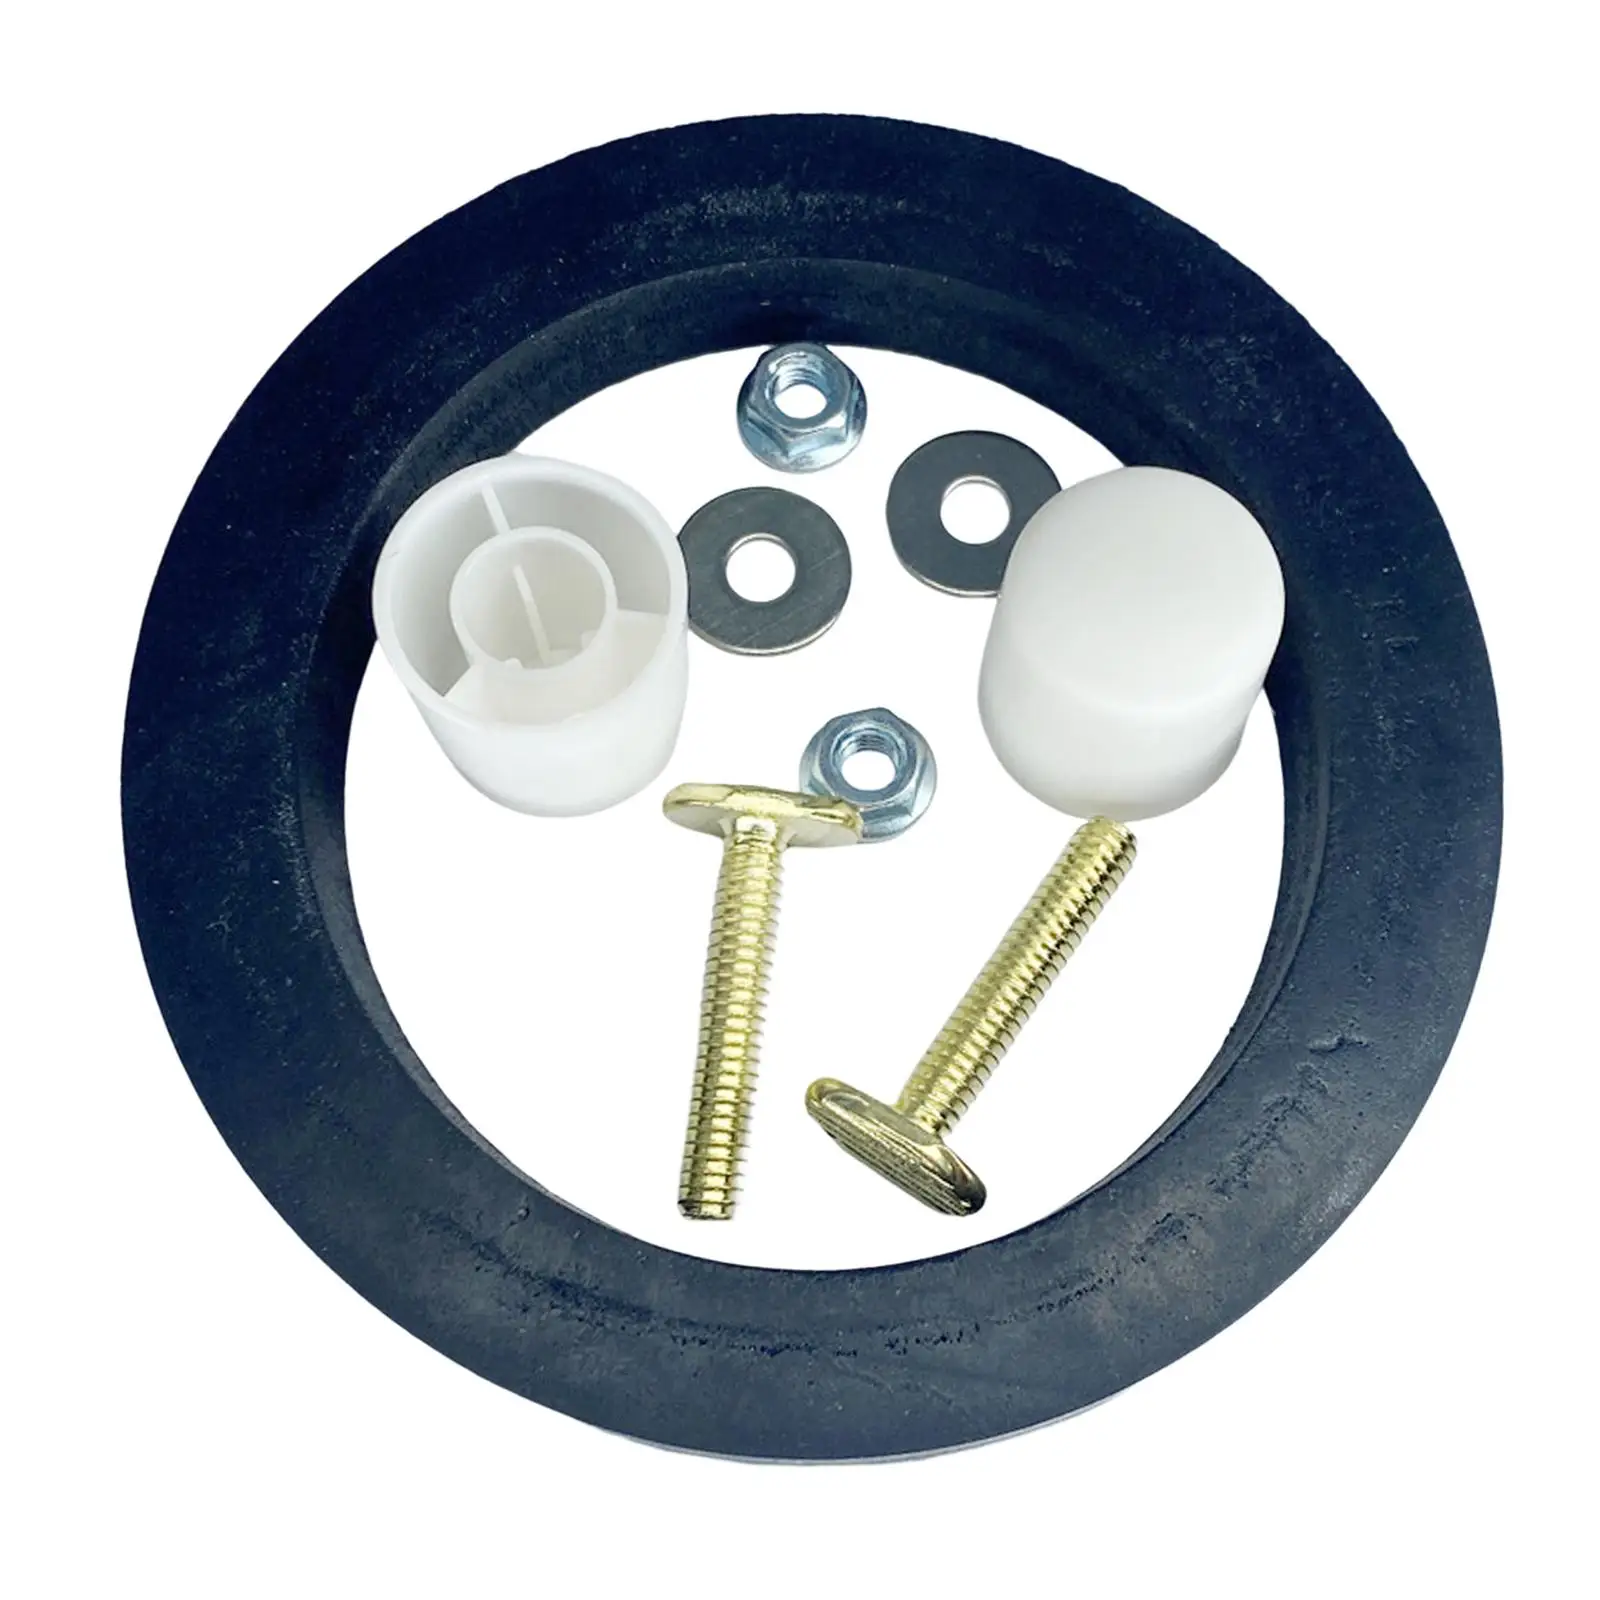 Seal Gasket of RV Toilet for Toilet Easy to Install Accessories Professional Lightweight Easily Install Durable